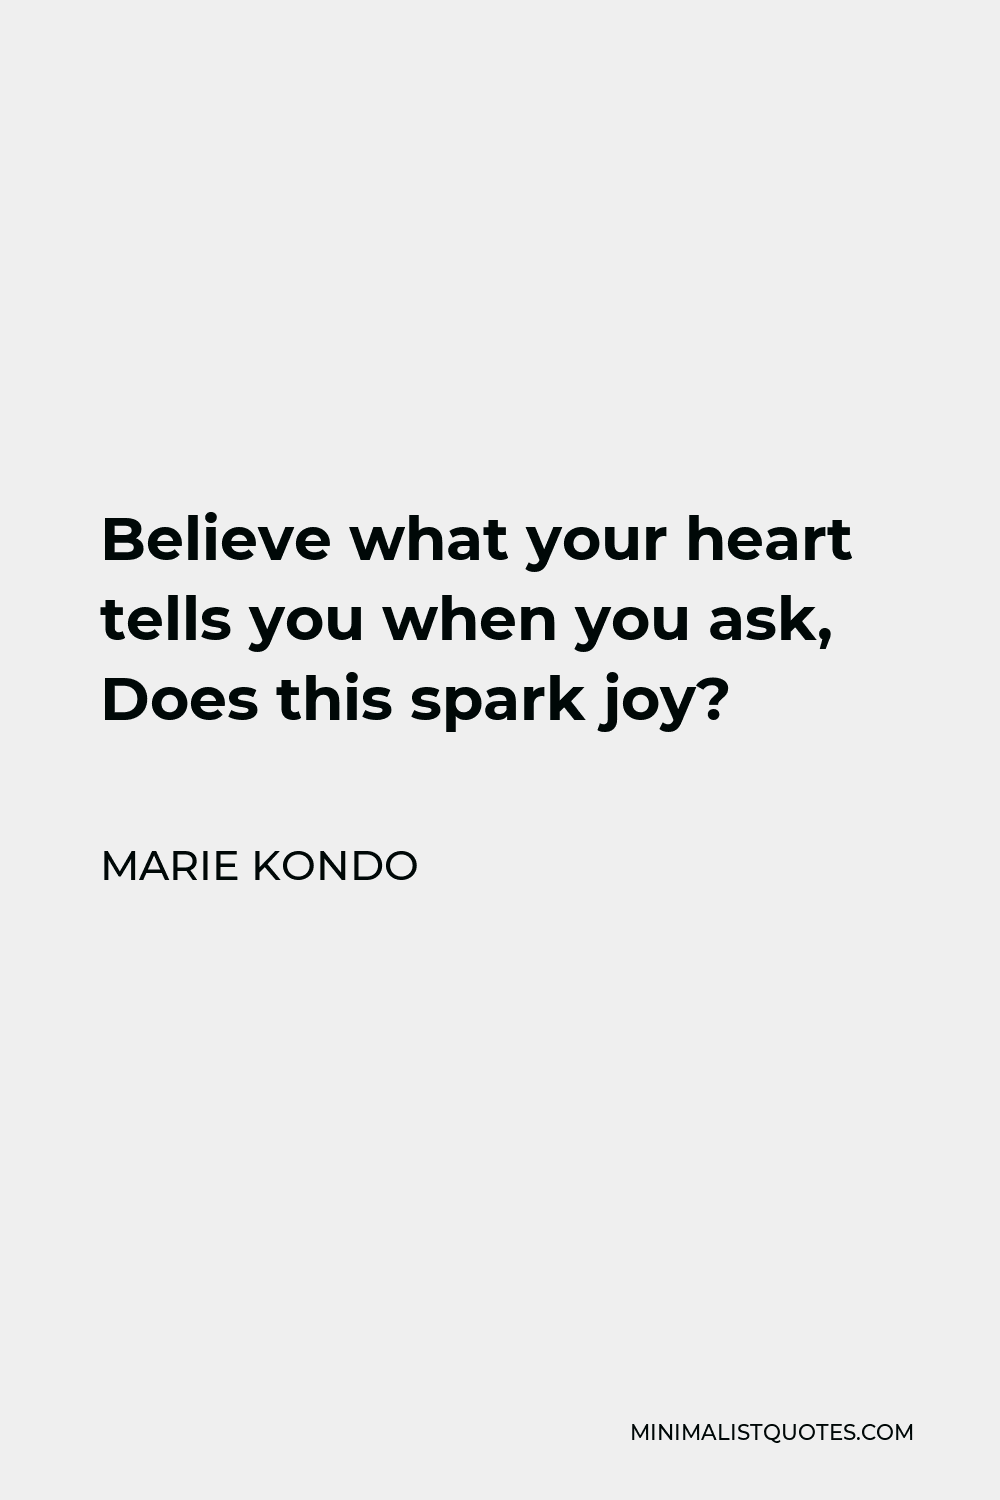 Marie Kondo Quote - Believe what your heart tells you when you ask, Does this spark joy?